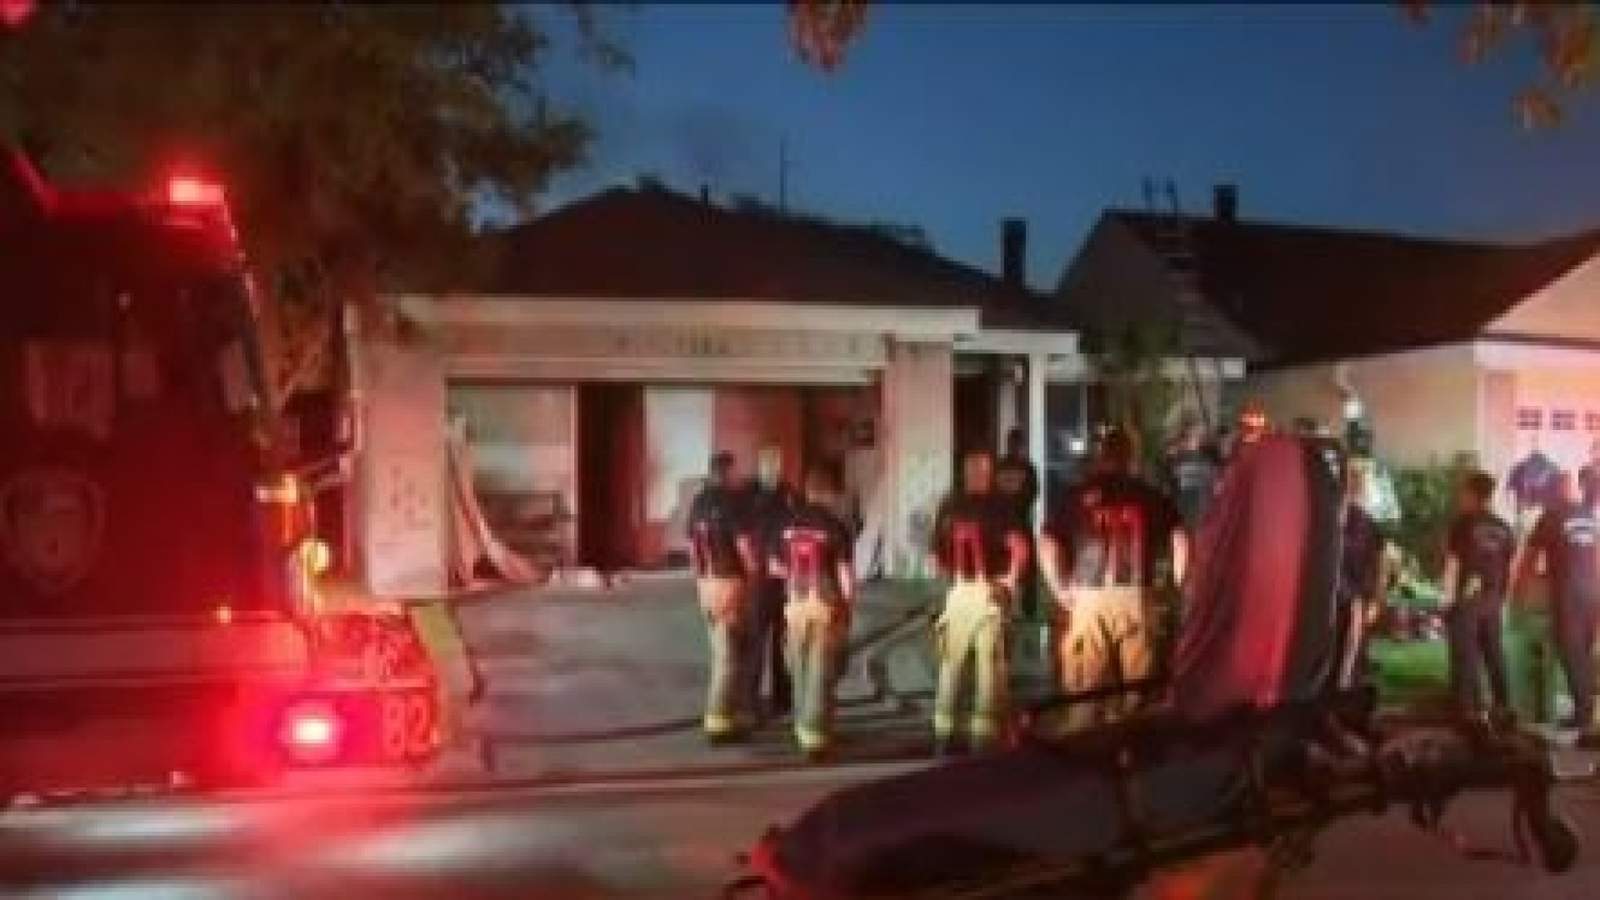 60-year-old man killed in fire at group home for people with special needs